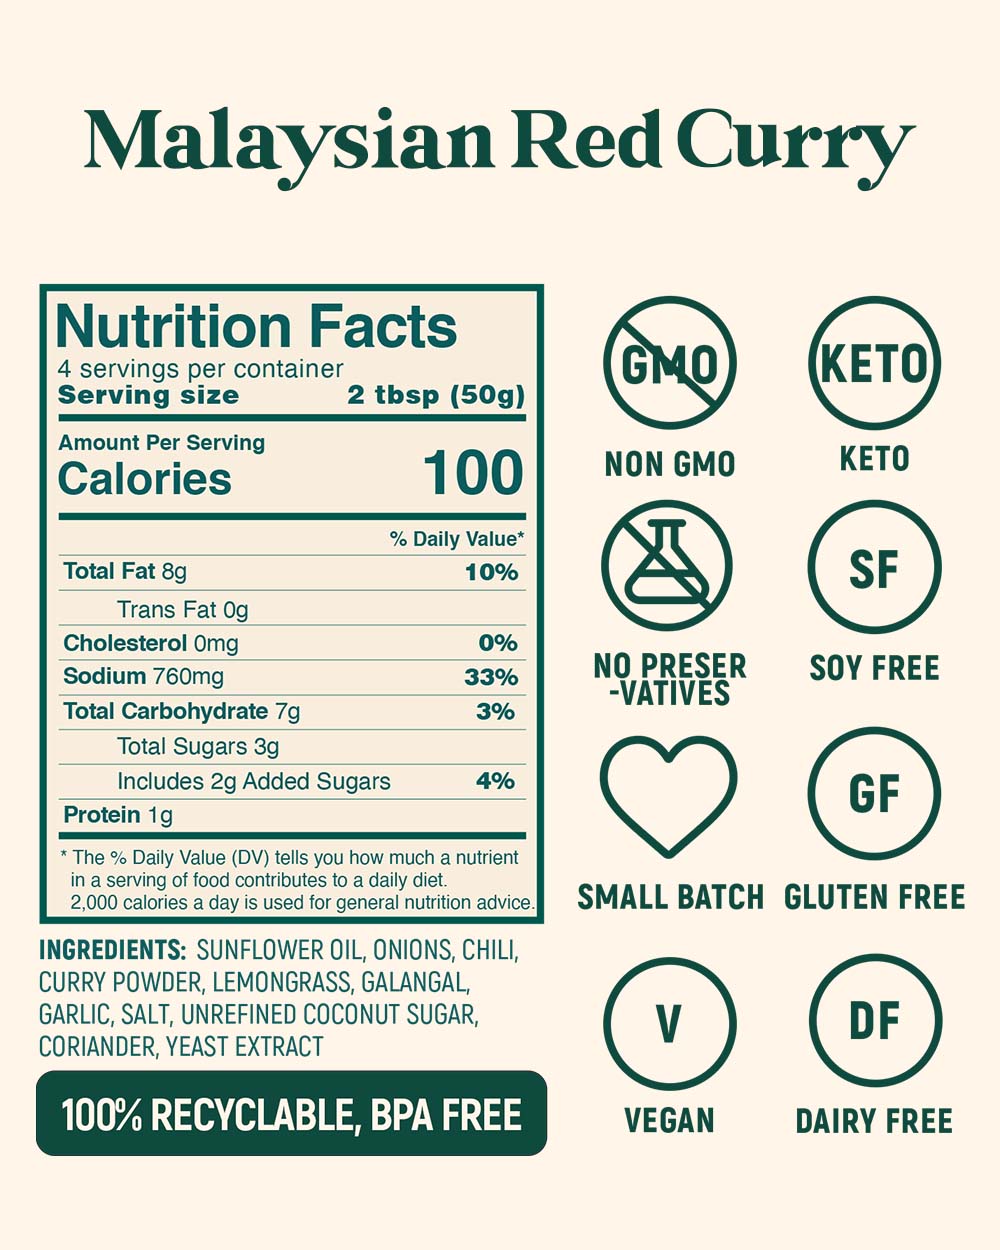 Red Curry Spice Kit - 3 Pack by Homiah